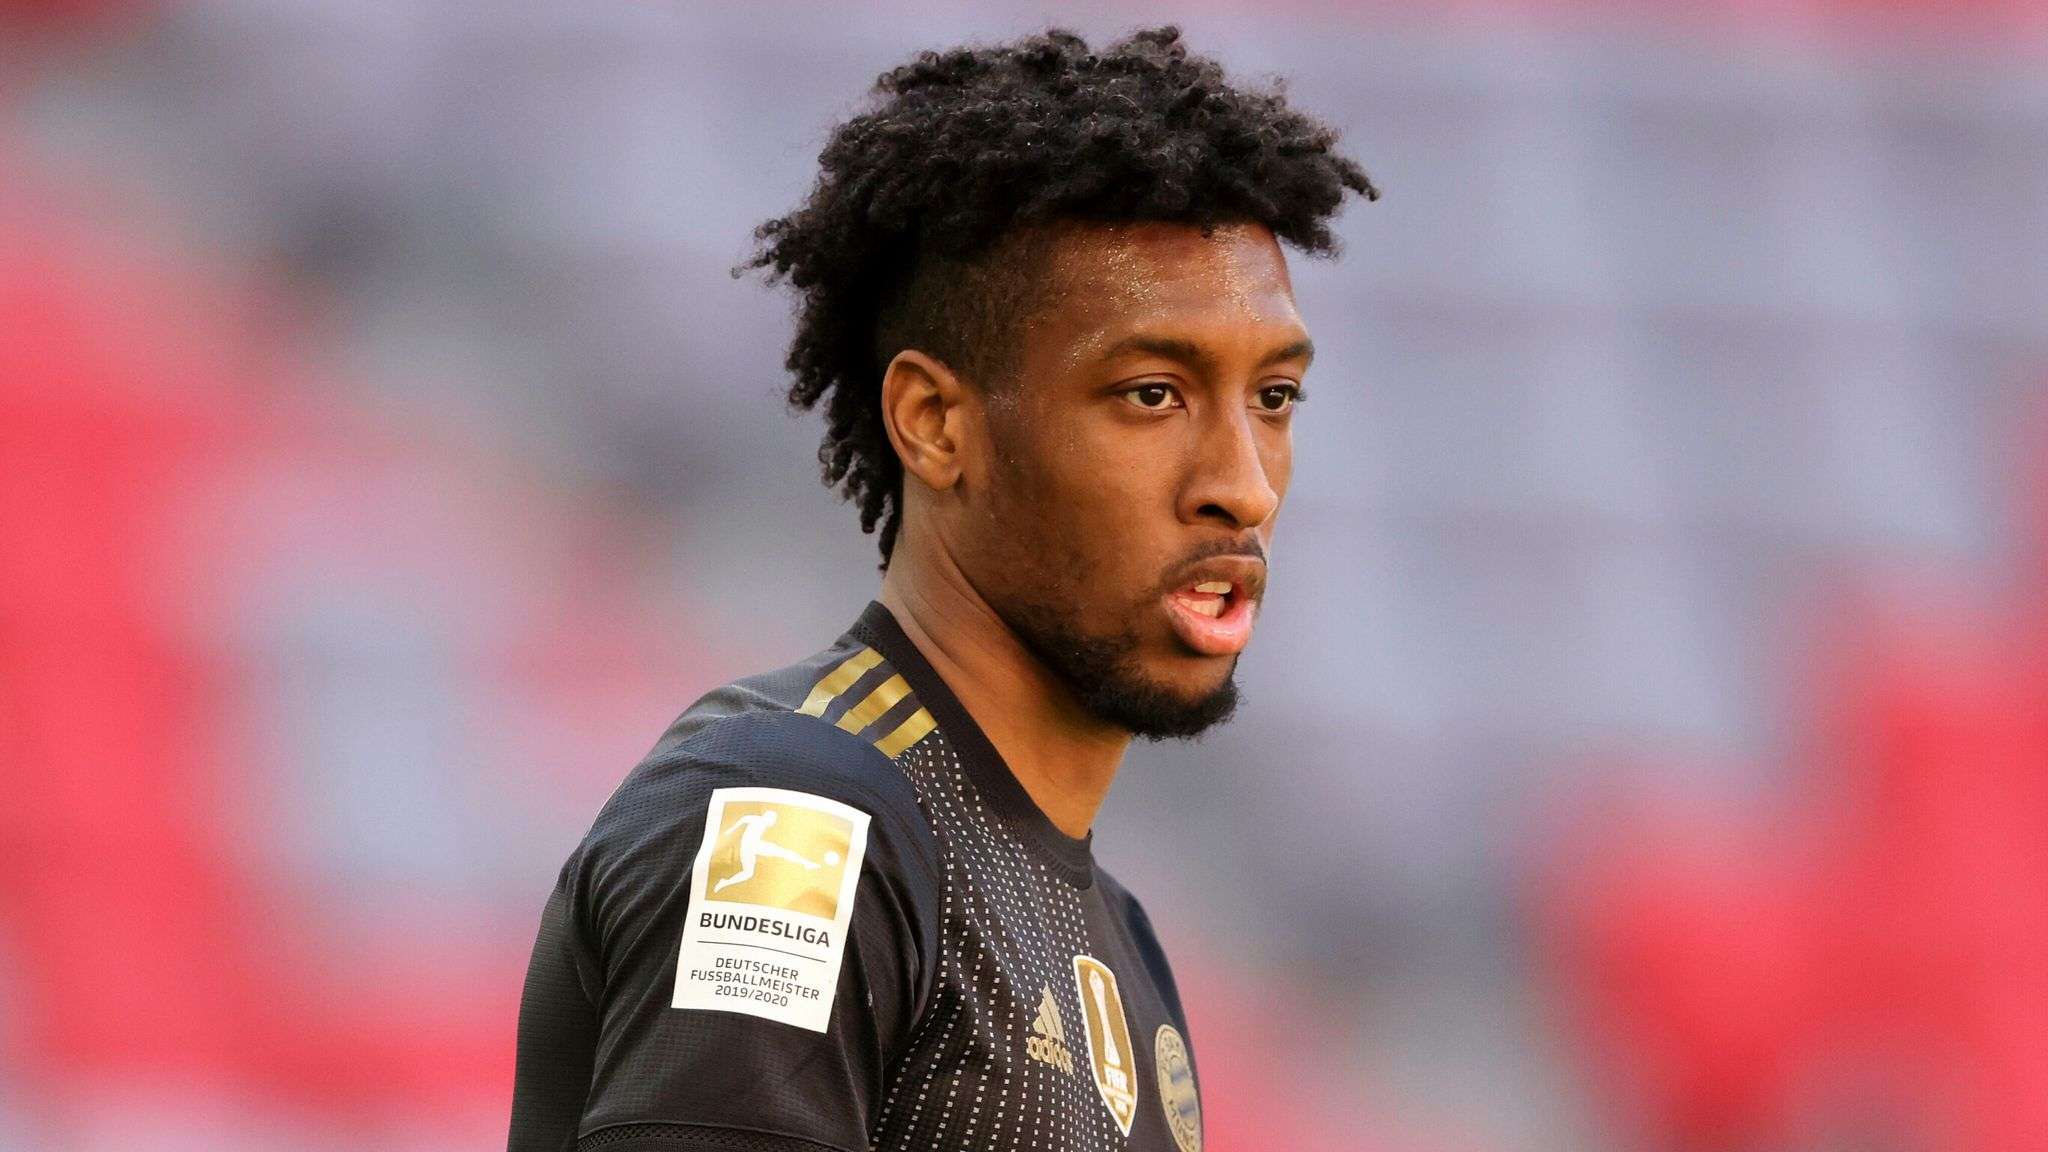 Kingsley Coman Biography: Wife, Net Worth, Salary, Age, Stats, Height, Parents